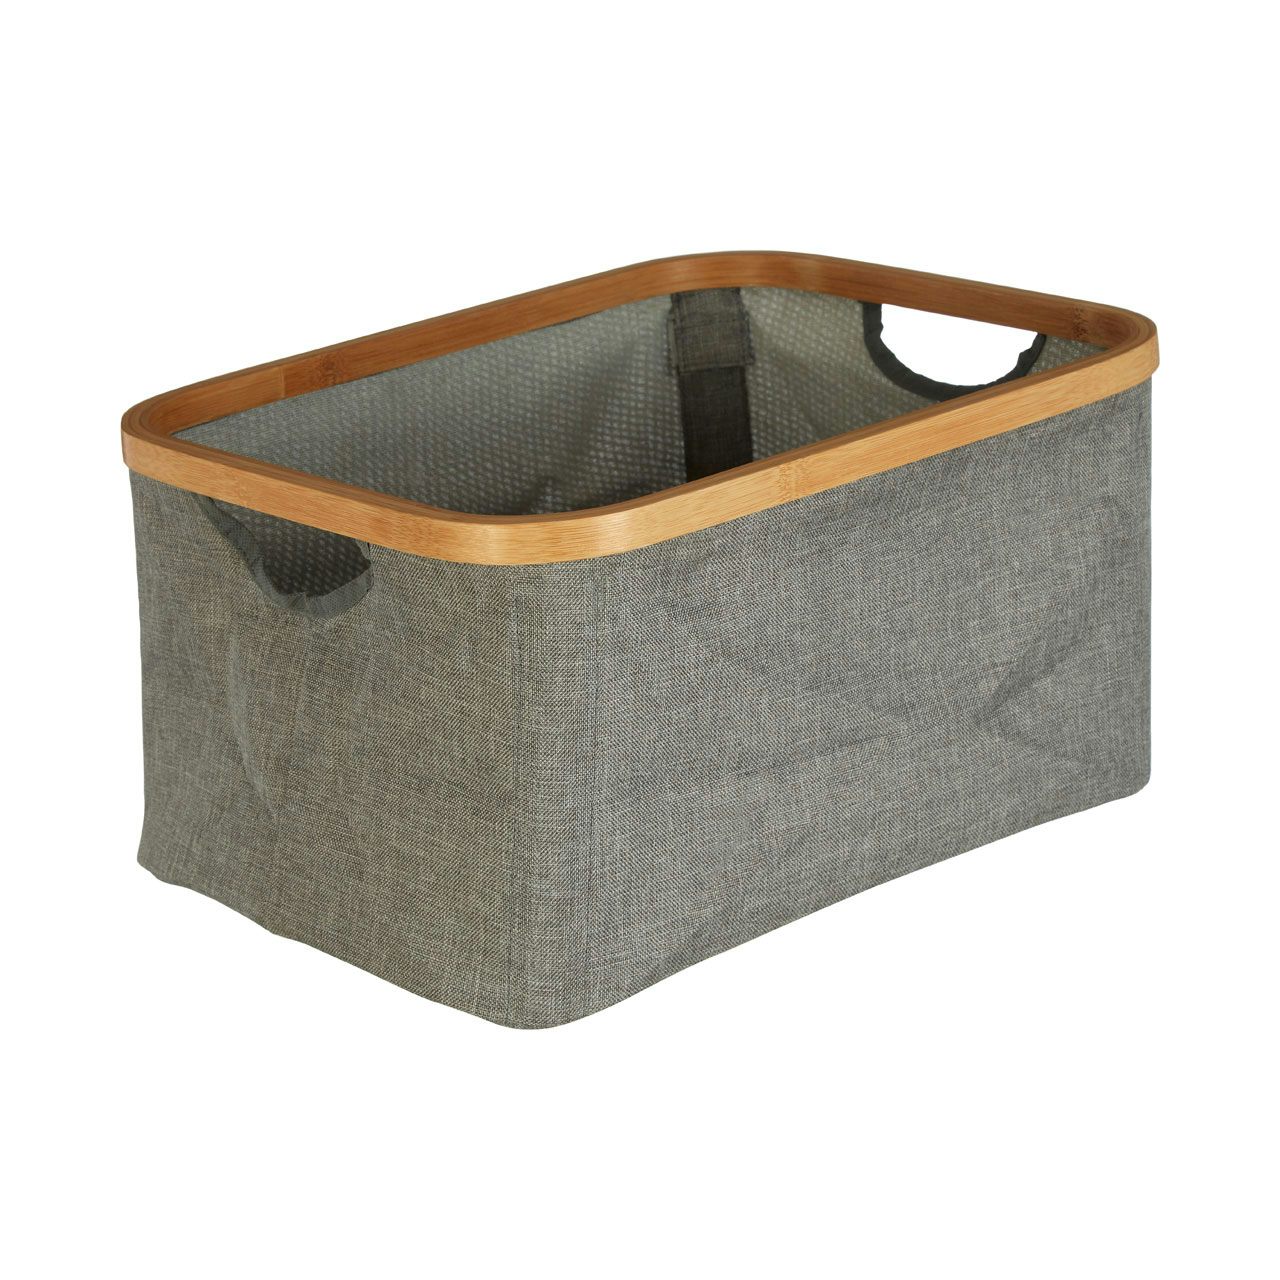 Accents Carrick bamboo and grey fabric storage basket